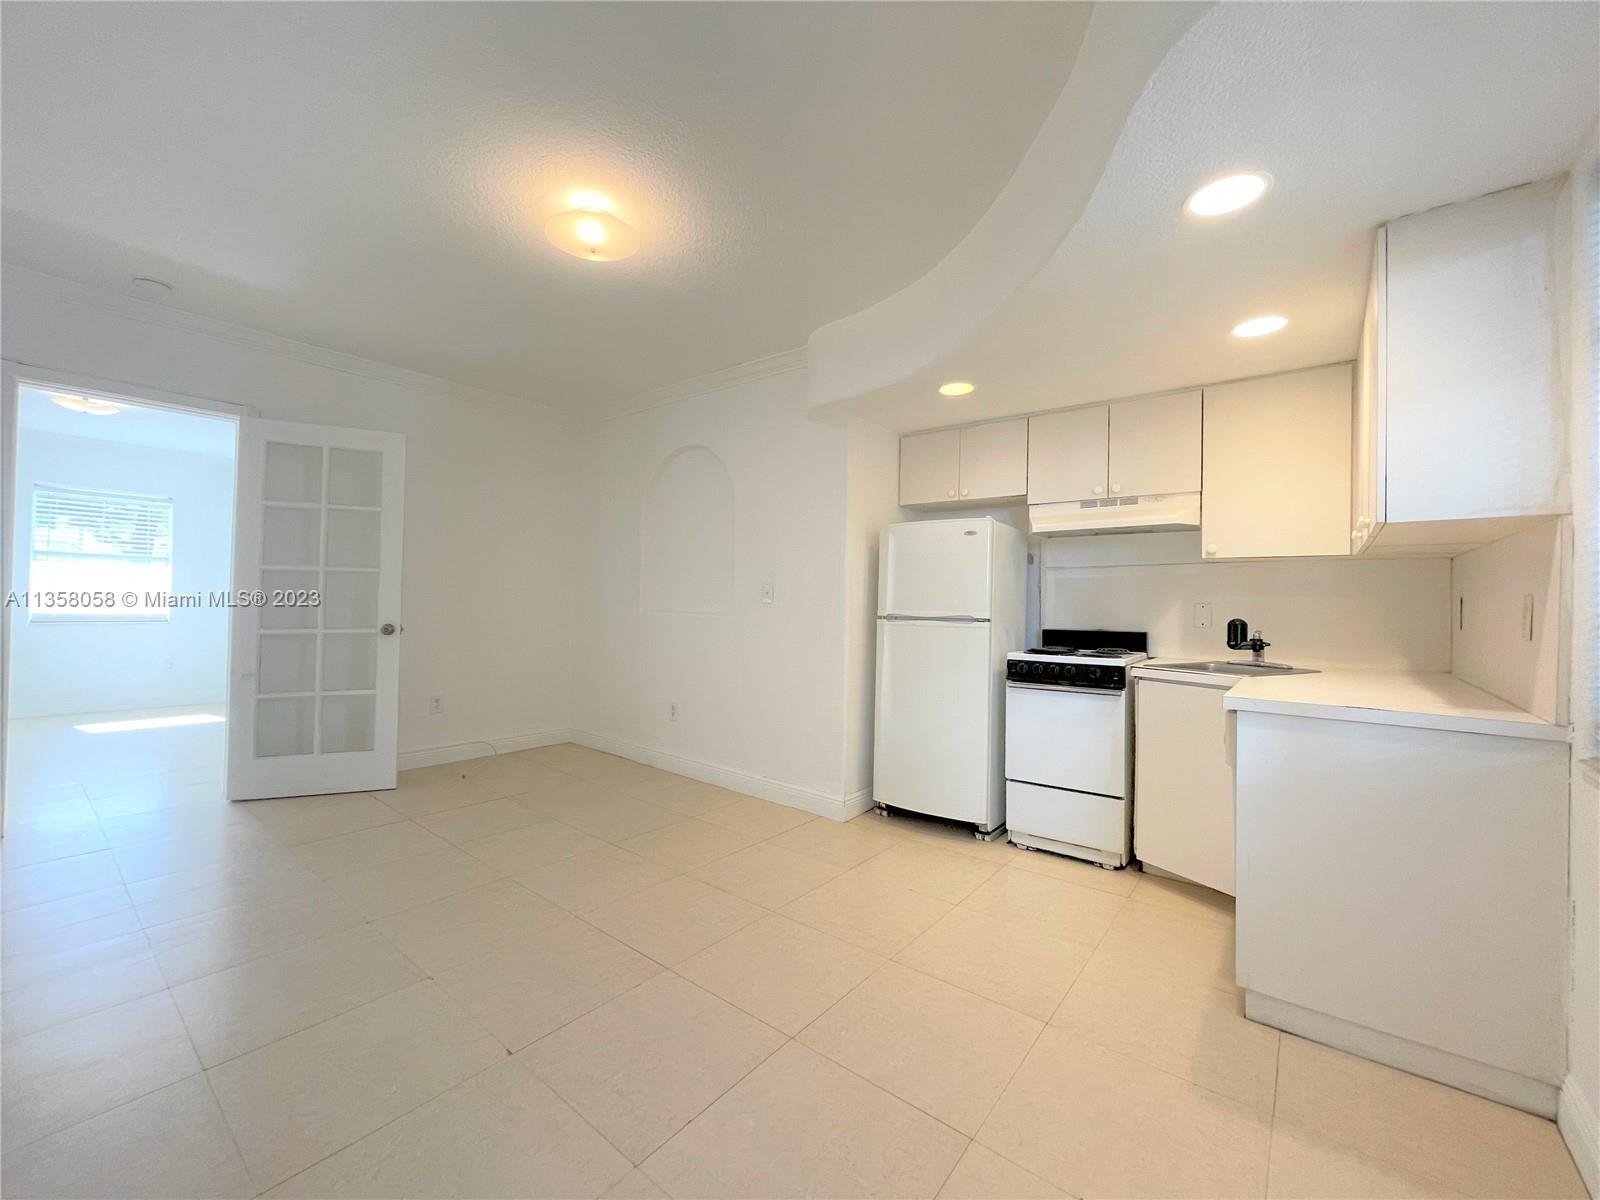 IMMACULATE CONDO IN THE HEART OF SOUTH BEACH WITH WASHER/DRYER IN THE UNIT, DISHWASHER AND NEW CENTR